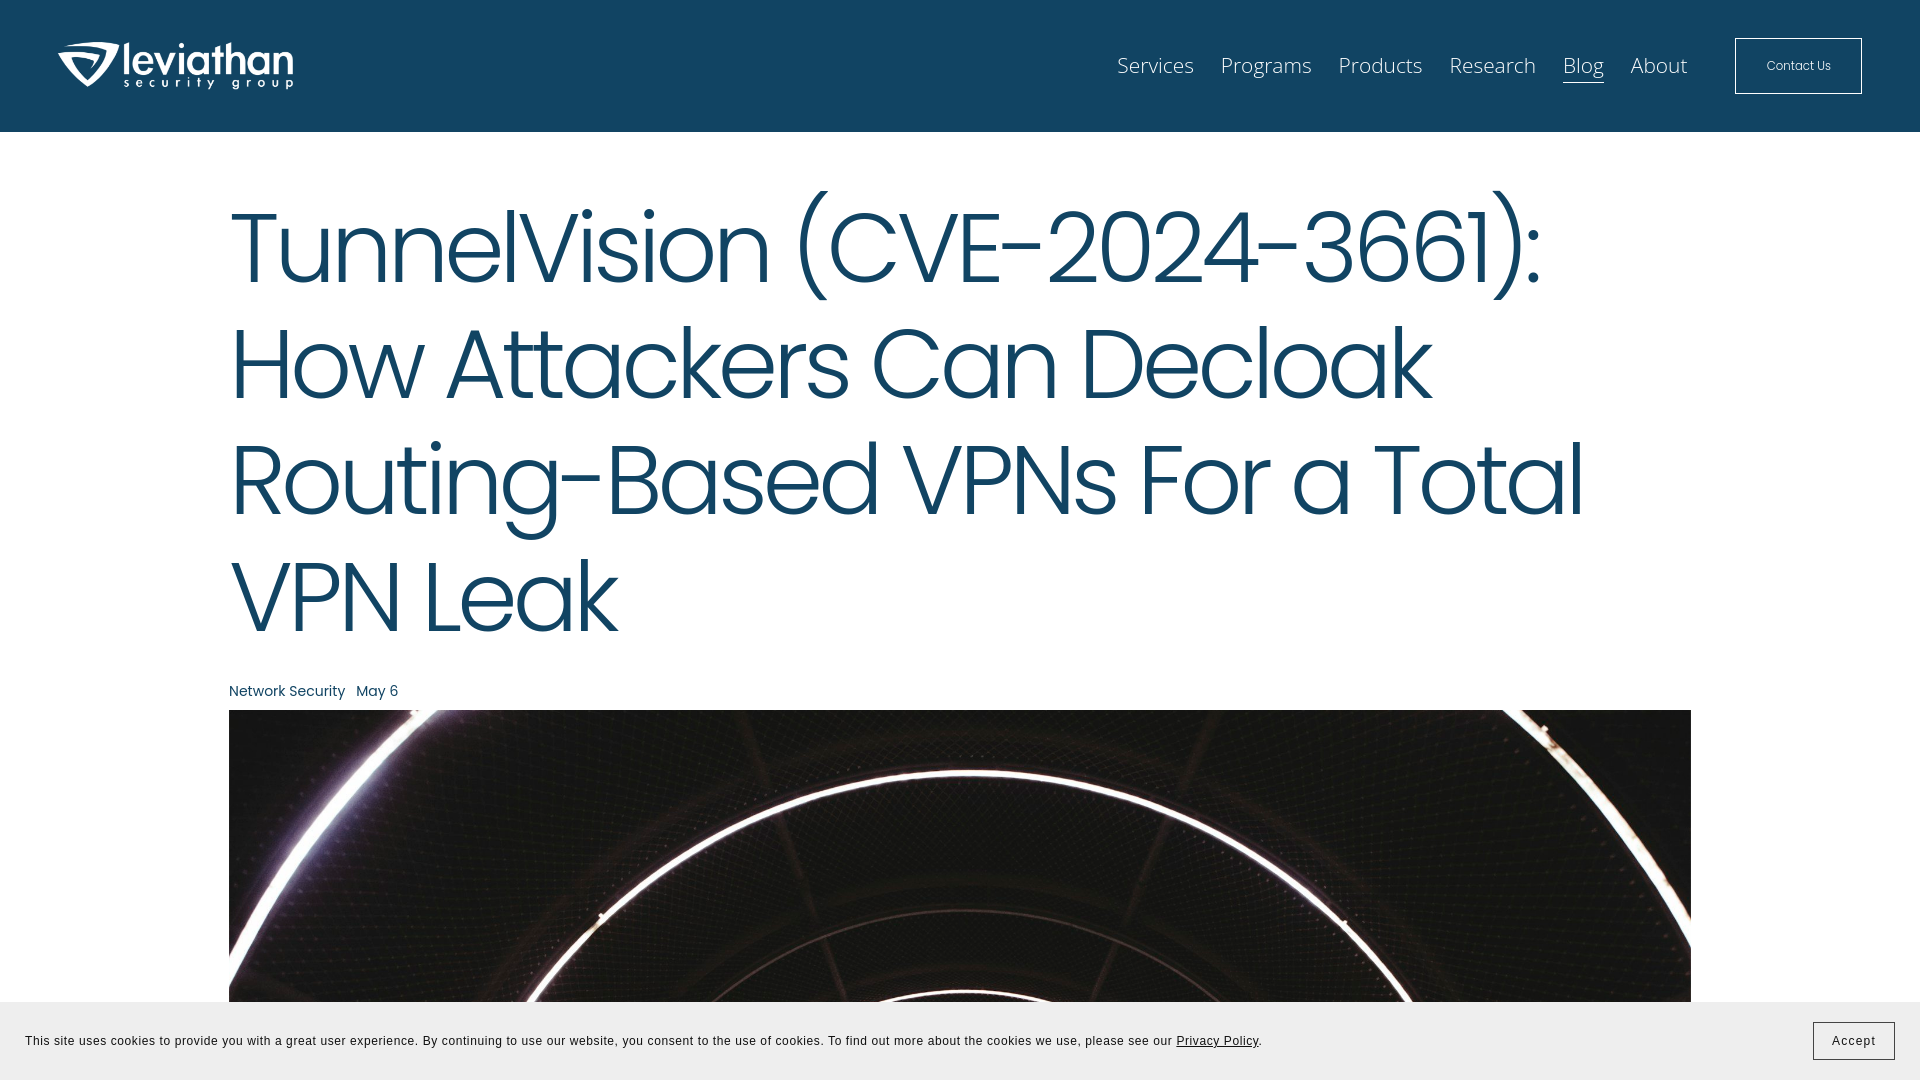 CVE-2024-3661: TunnelVision - How Attackers Can Decloak Routing-Based VPNs For a Total VPN Leak — Leviathan Security Group - Penetration Testing, Security Assessment, Risk Advisory